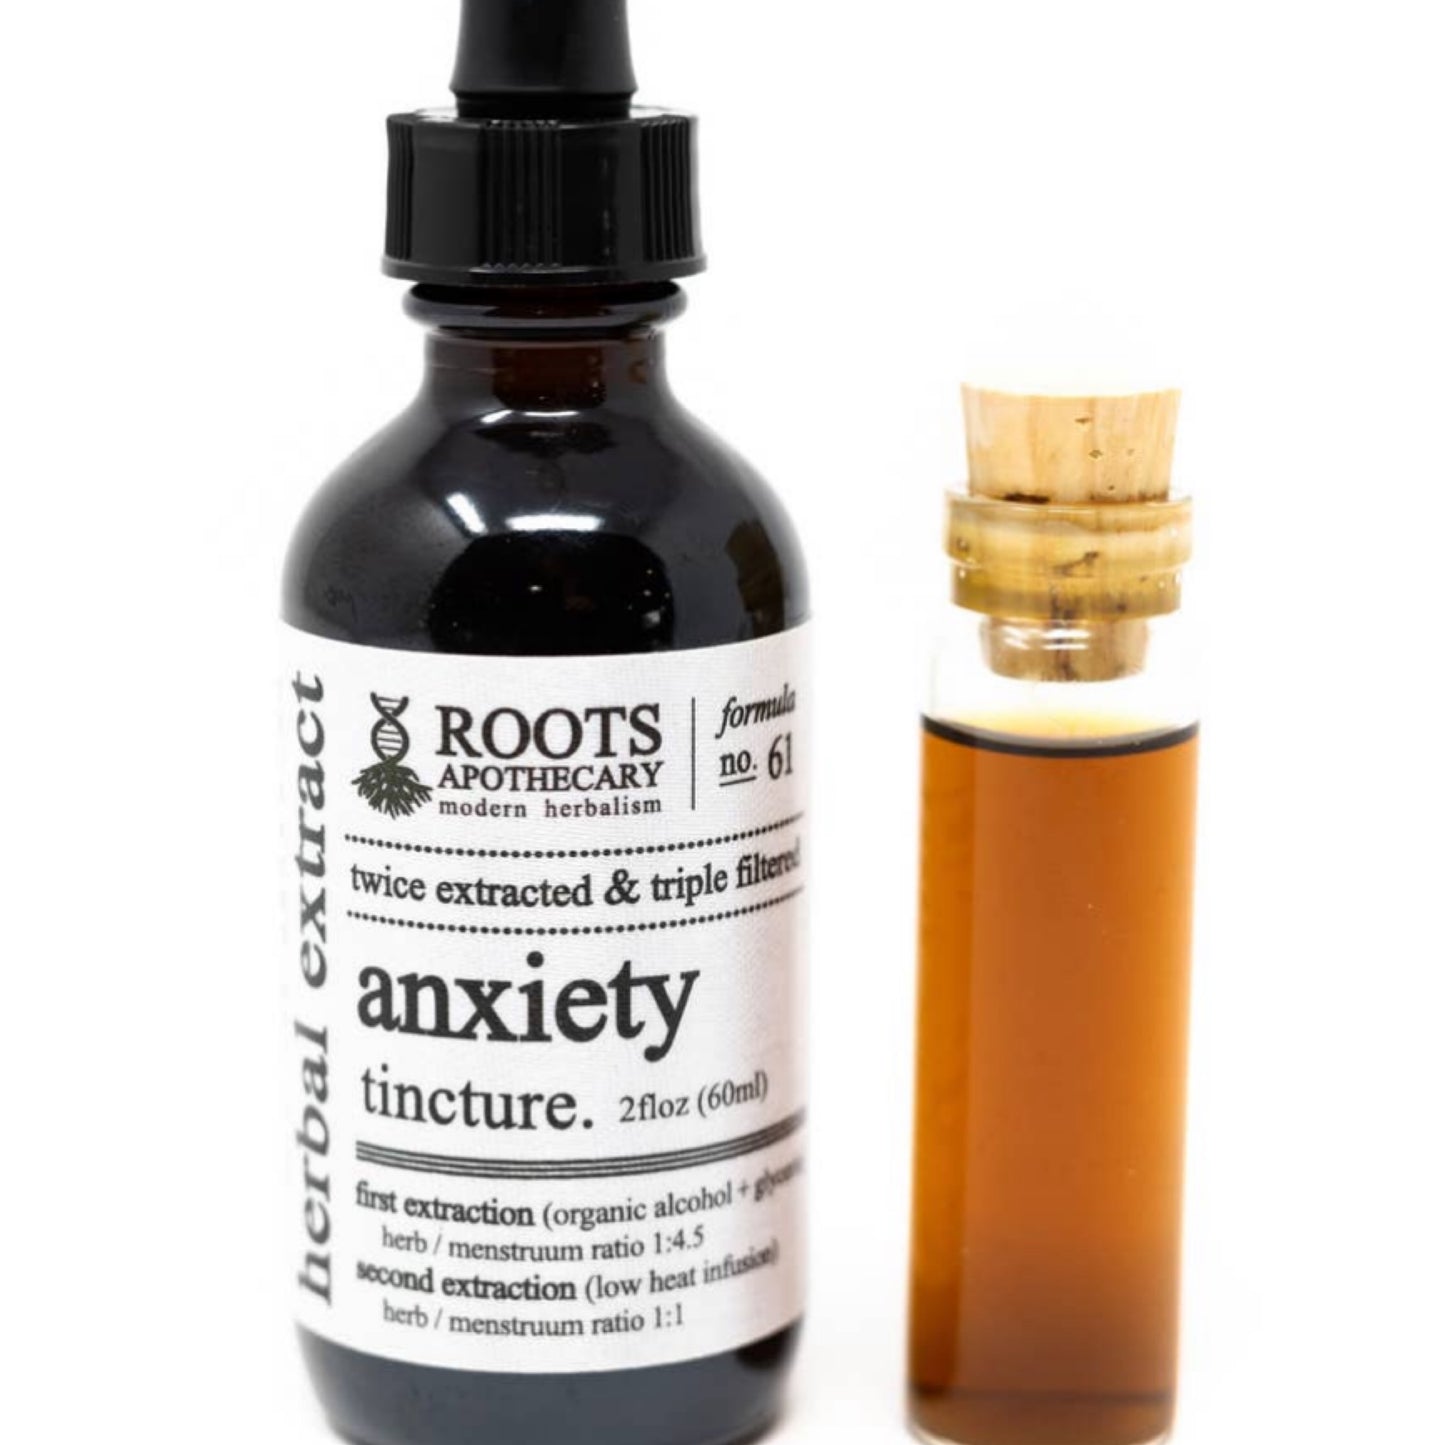 Roots Anxiety Tincture